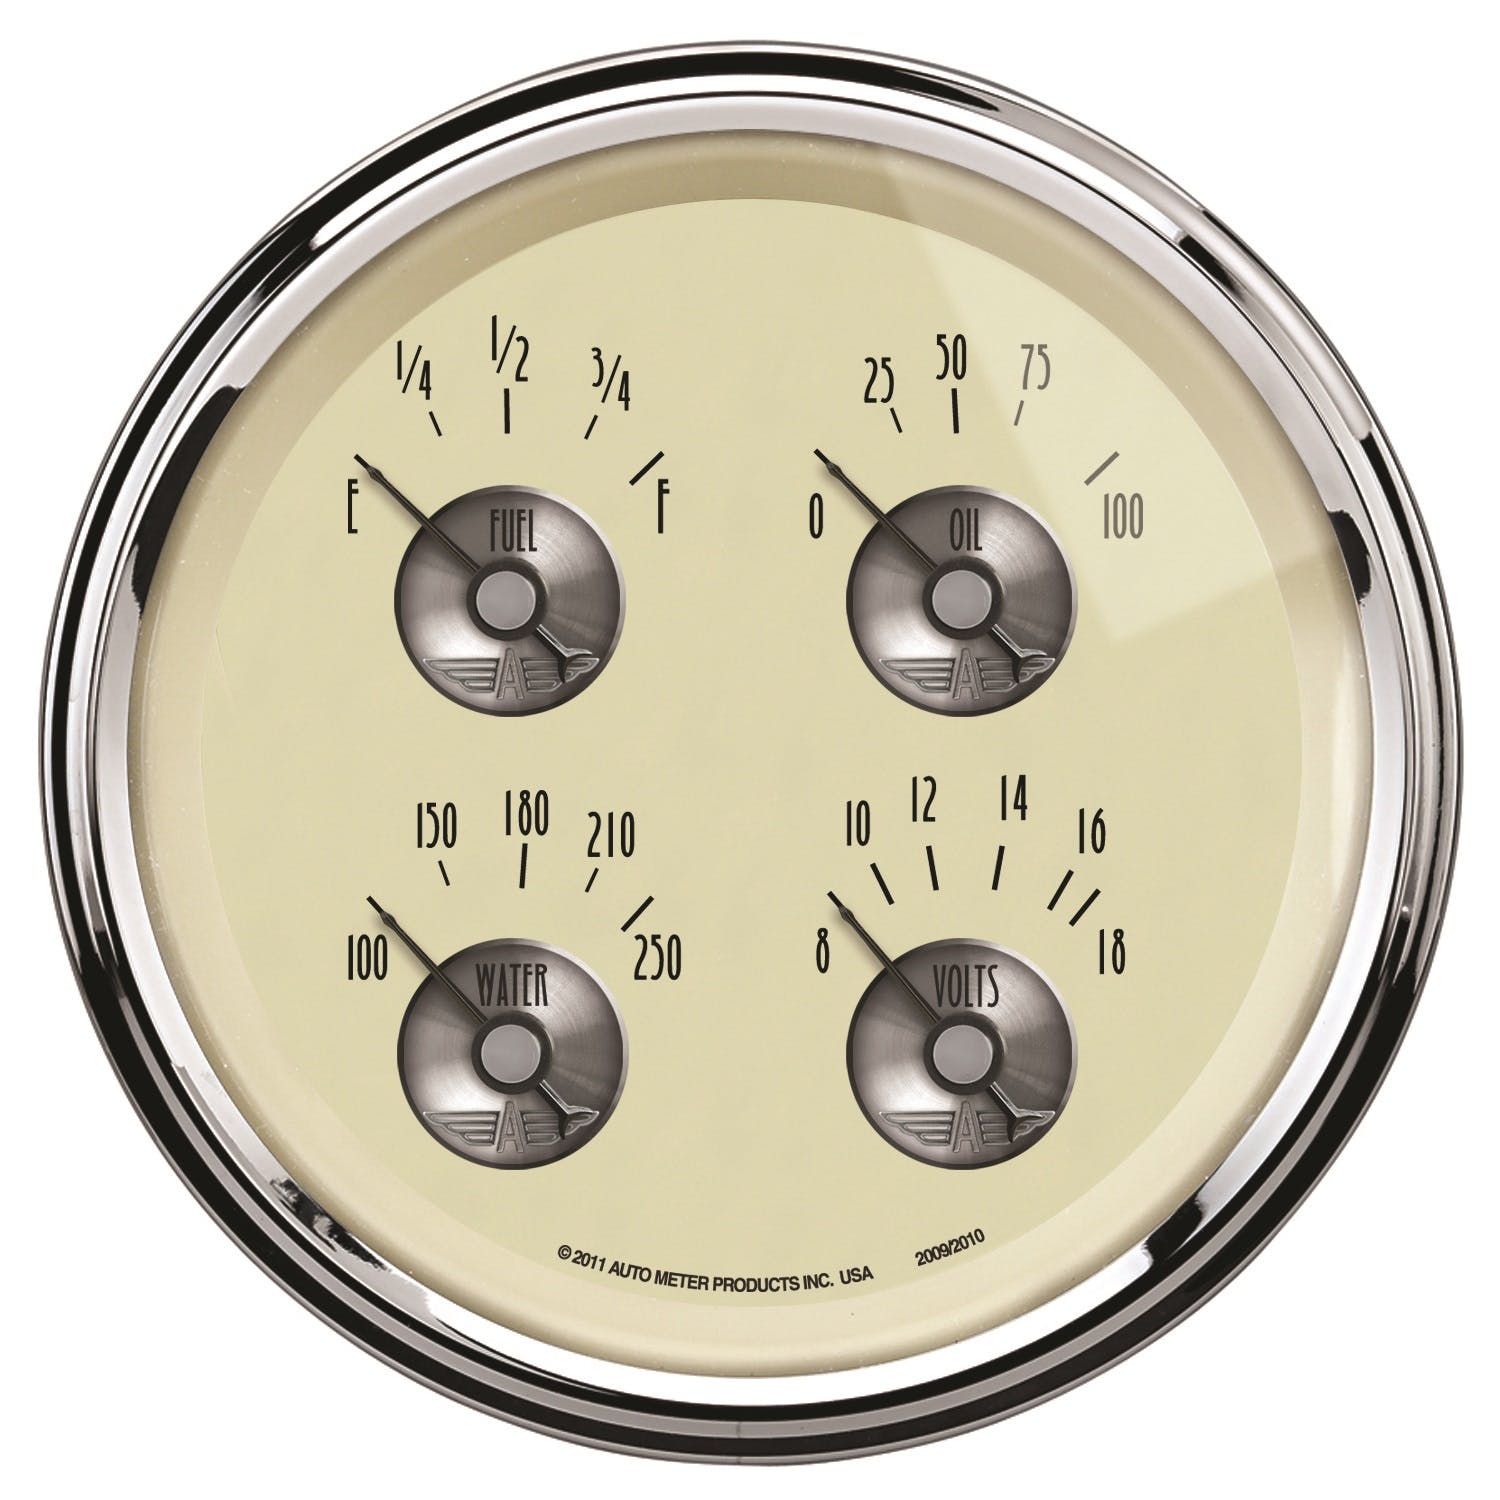 AutoMeter Products 2009 Gauge; Quad; 5in.; 0OE to 90OF; Elec; Prestige Antq. Ivory